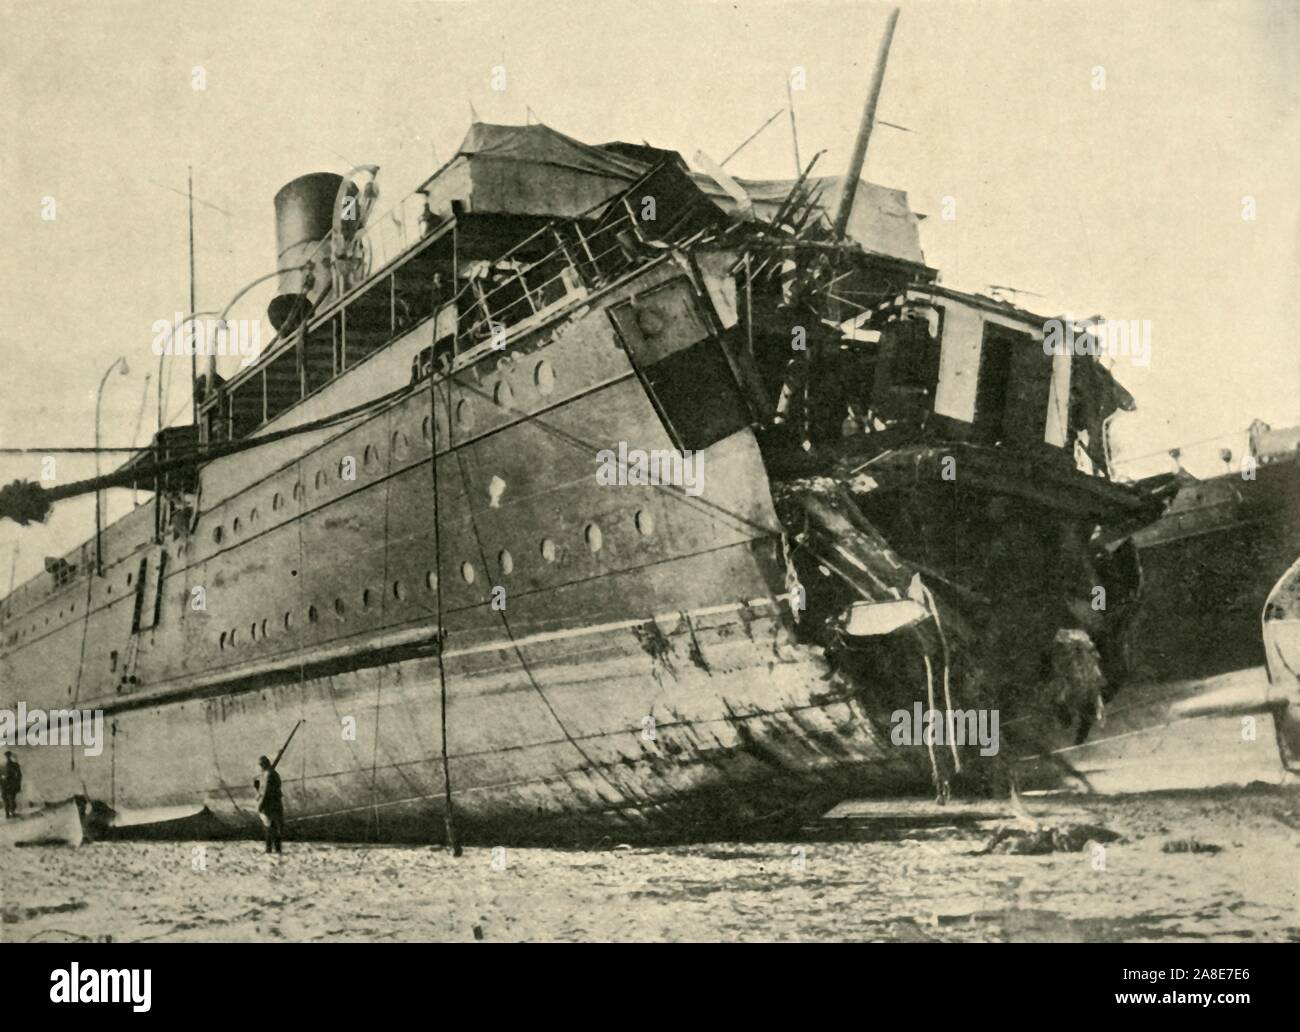 'The Torpedoing of the Channel Steamer Sussex', First World War, March 1916, (c1920). '...view of the vessel beached at Boulogne, showing how the bows were blown clean off by the explosion'. On 24 March 1916, the passenger ferry SS 'Sussex' was torpedoed by a German U-boat in the Channel between Folkestone and Dieppe. The ship was severely damaged and many passengers were drowned - some sources say at least 50 were killed, with the figure 80-100 also suggested. From &quot;The Great World War: A History&quot;, Volume V, edited by Frank A Mumby. [The Gresham Publishing Company Ltd, London, c1920 Stock Photo